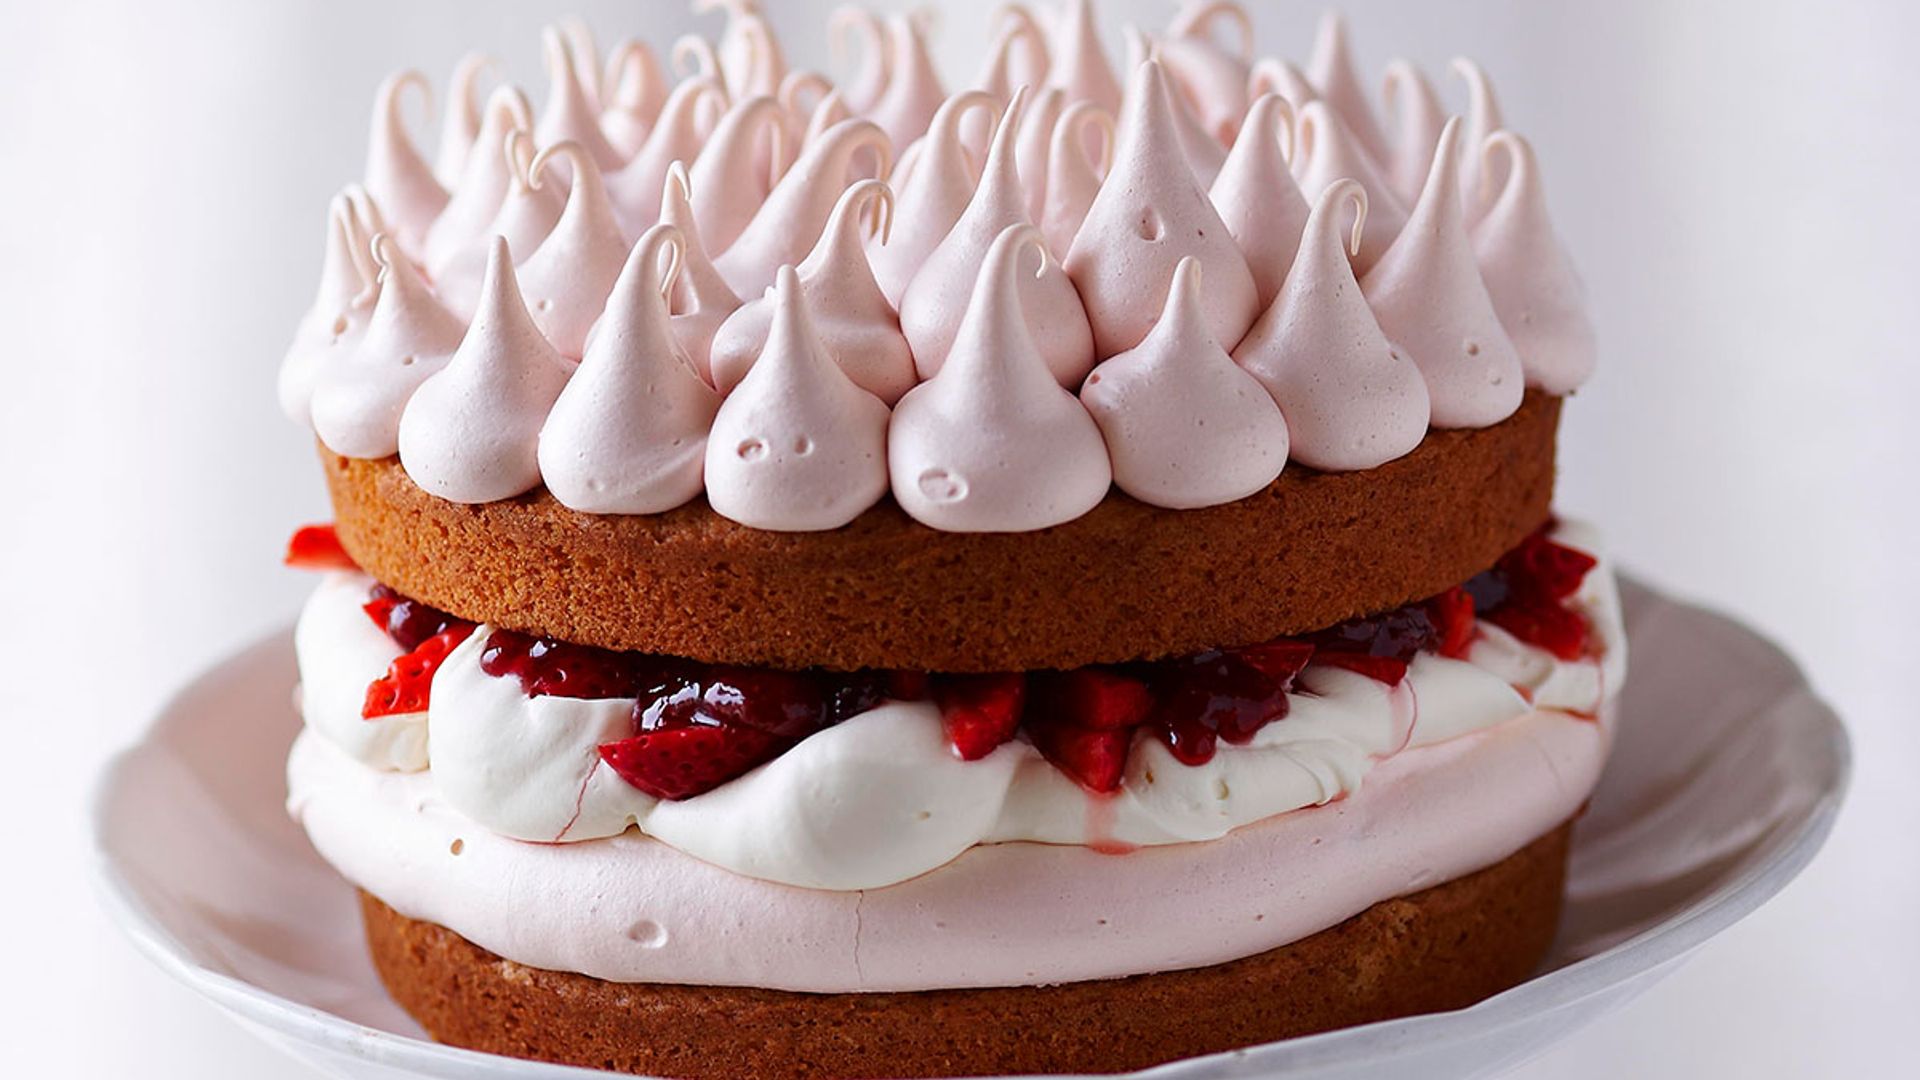 Bake along with the Great British Bake Off's Dessert Week with this layered berry meringue cake recipe